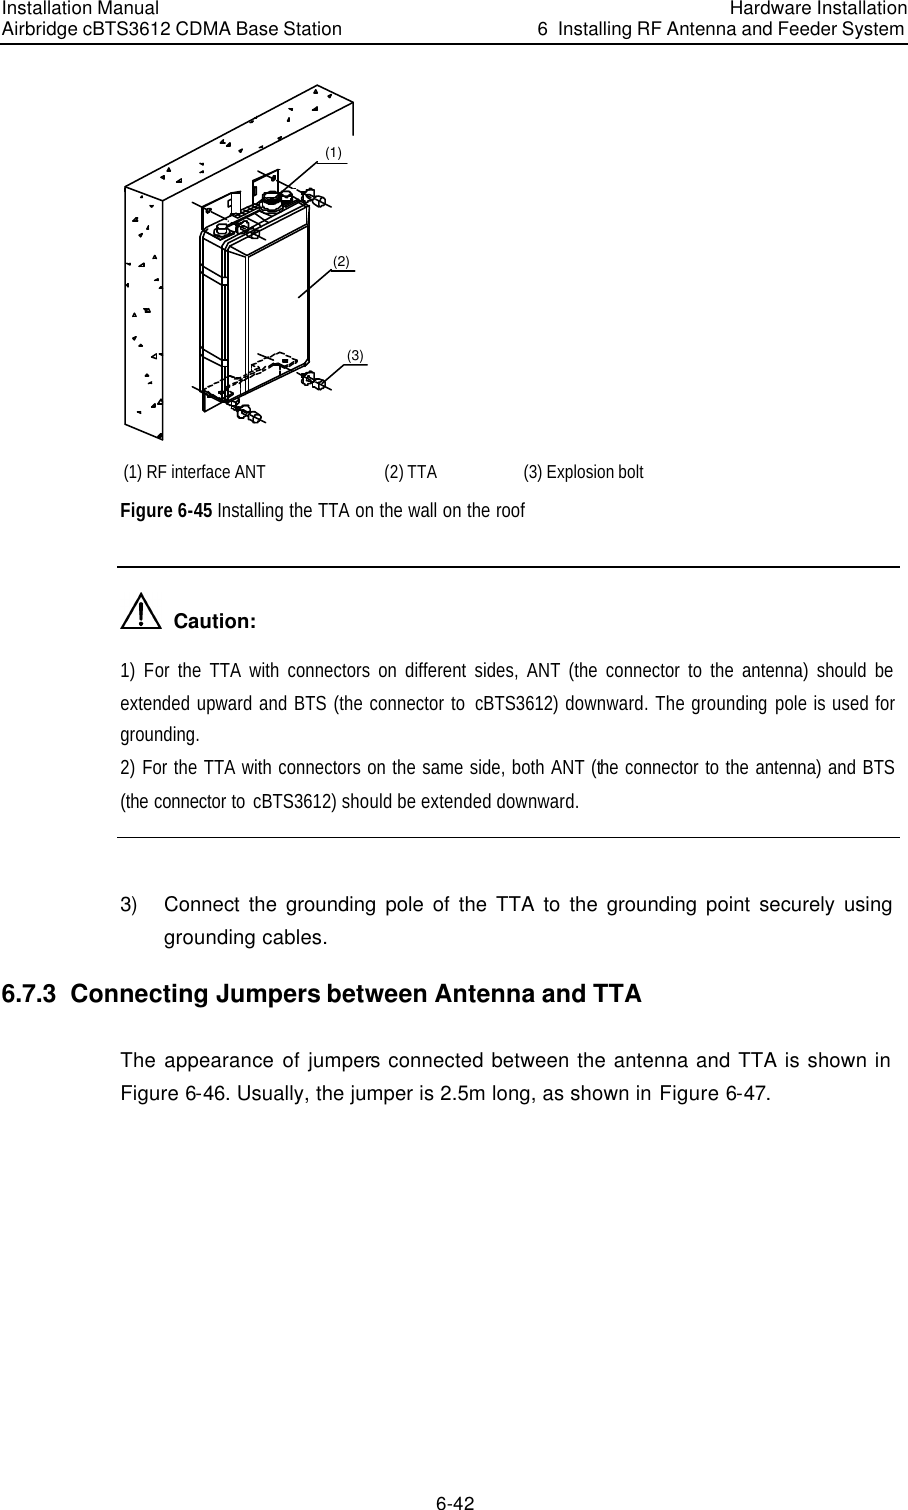 Installation Manual Airbridge cBTS3612 CDMA Base Station Hardware Installation6  Installing RF Antenna and Feeder System 6-42 (1)(2)(3) (1) RF interface ANT (2) TTA (3) Explosion bolt Figure 6-45 Installing the TTA on the wall on the roof   Caution: 1)  For the TTA with connectors on different sides, ANT (the connector to the antenna) should be extended upward and BTS (the connector to  cBTS3612) downward. The grounding pole is used for grounding. 2) For the TTA with connectors on the same side, both ANT (the connector to the antenna) and BTS (the connector to cBTS3612) should be extended downward.  3) Connect the grounding pole of the TTA to the grounding point securely using grounding cables. 6.7.3  Connecting Jumpers between Antenna and TTA The appearance of jumpers connected between the antenna and TTA is shown in    Figure 6-46. Usually, the jumper is 2.5m long, as shown in Figure 6-47. 